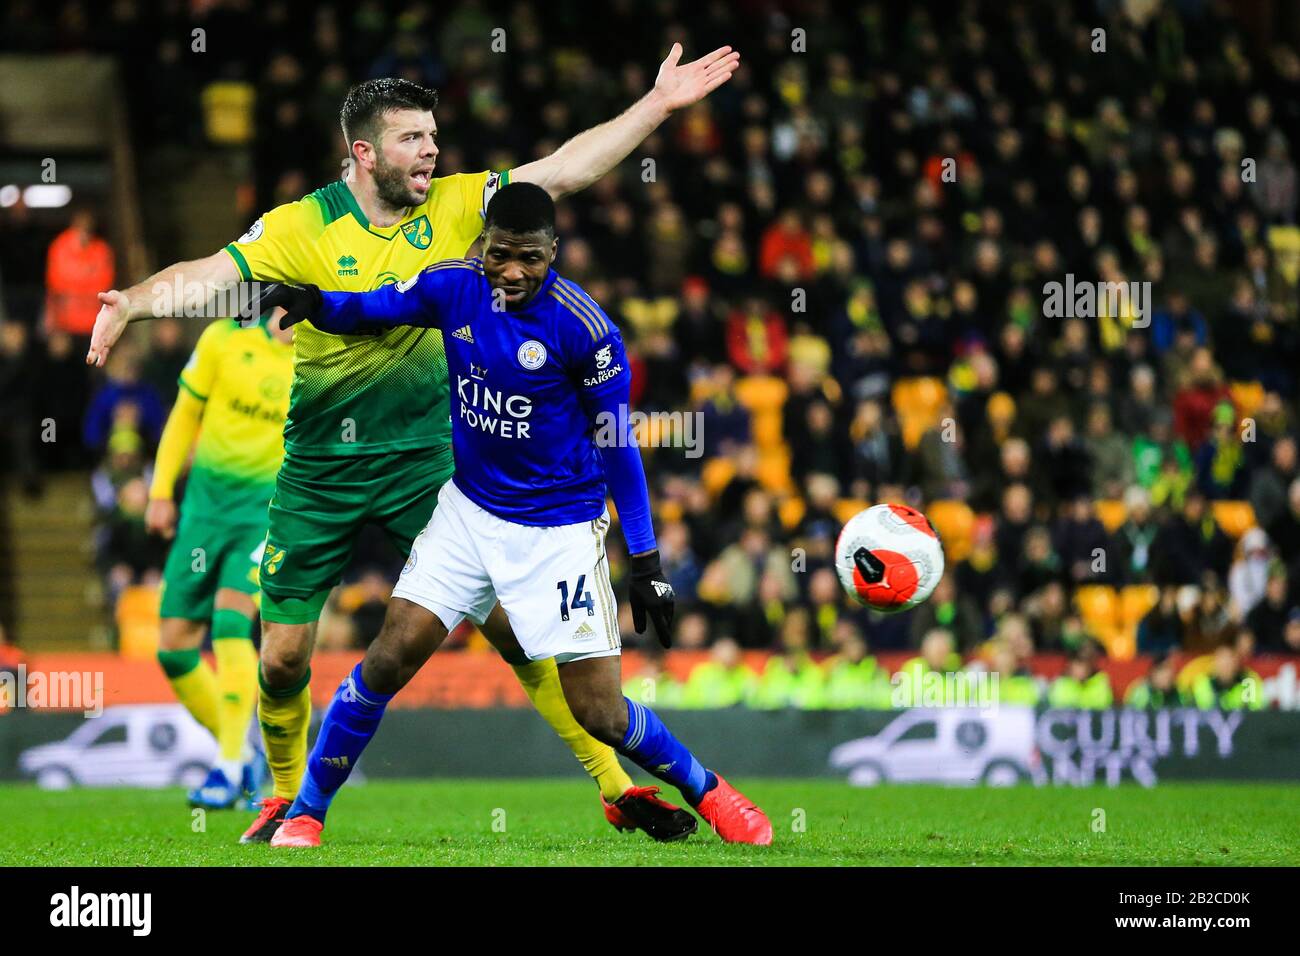 28th February 2020, Carrow Road, Norwich, England; Premier League, Norwich City v Leicester City : Grant Hanley (05) of Norwich City struggles with Kelechi Iheanacho (14) of Leicester City Stock Photo